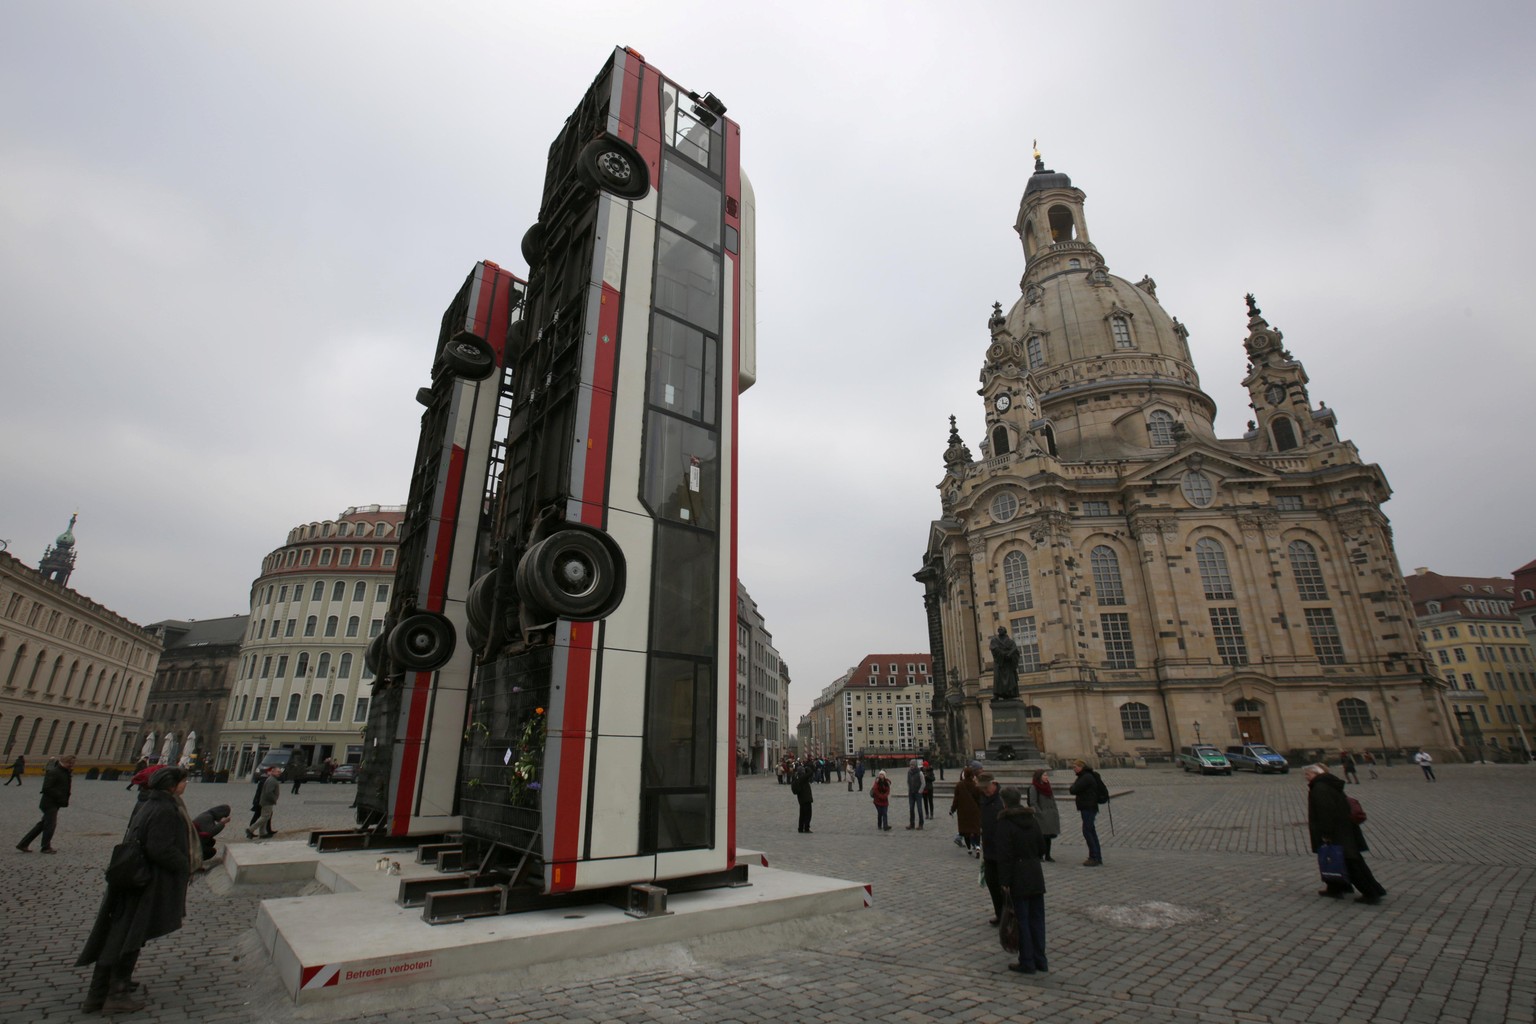 People walk next to the art instalation &quot;Monument&quot; by Syrian artist Manaf Halbouni, made from three passenger busses in Dresden, Germany February 8, 2017. REUTERS/Matthias Schumann